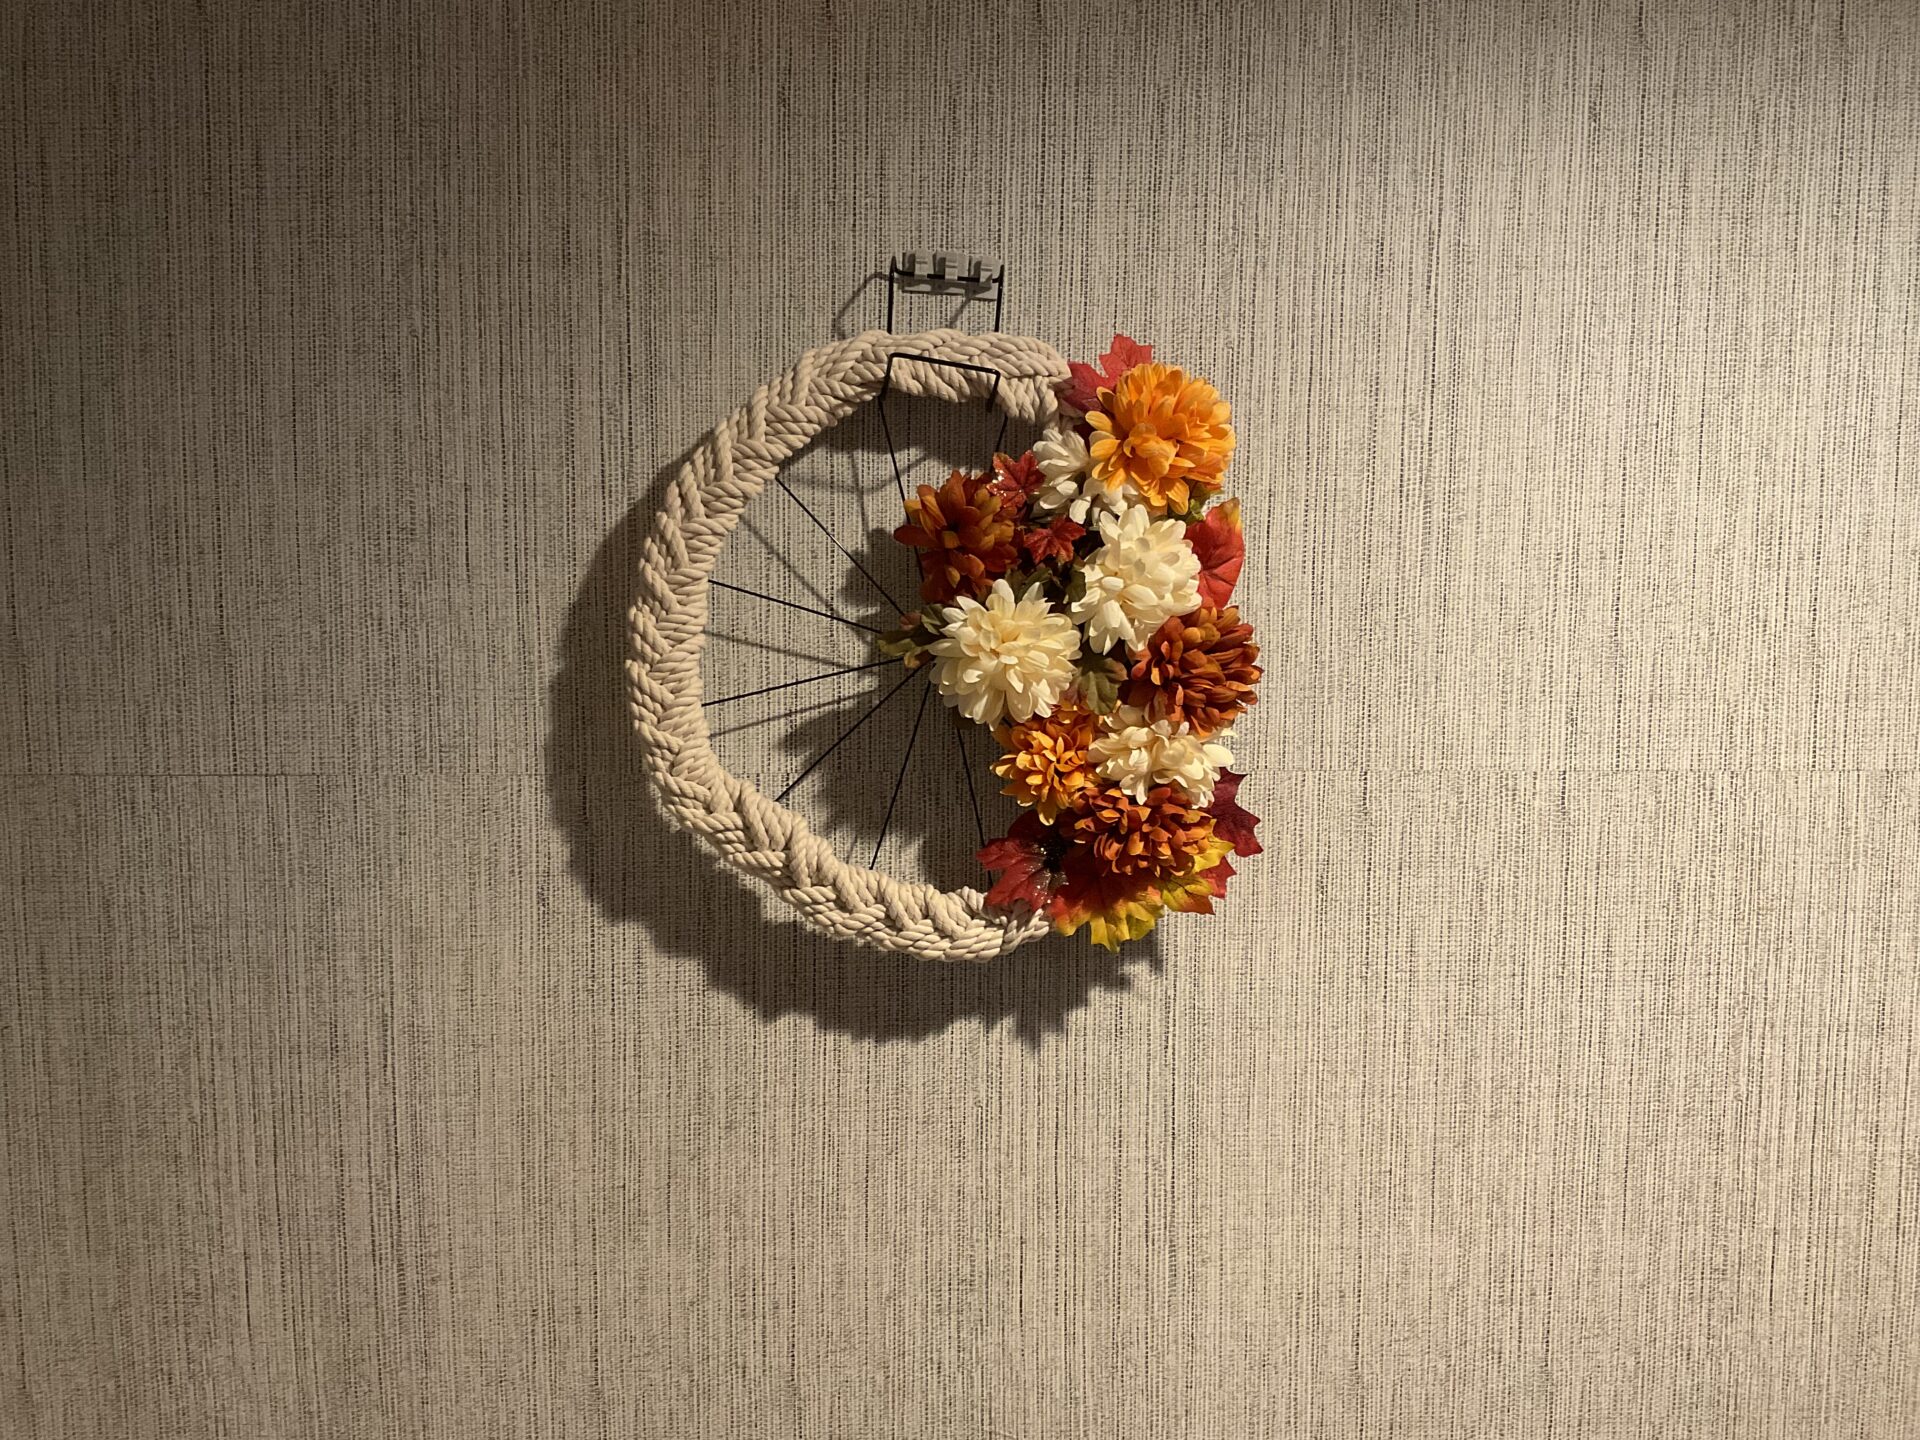 A wreath of flowers hanging on the wall.